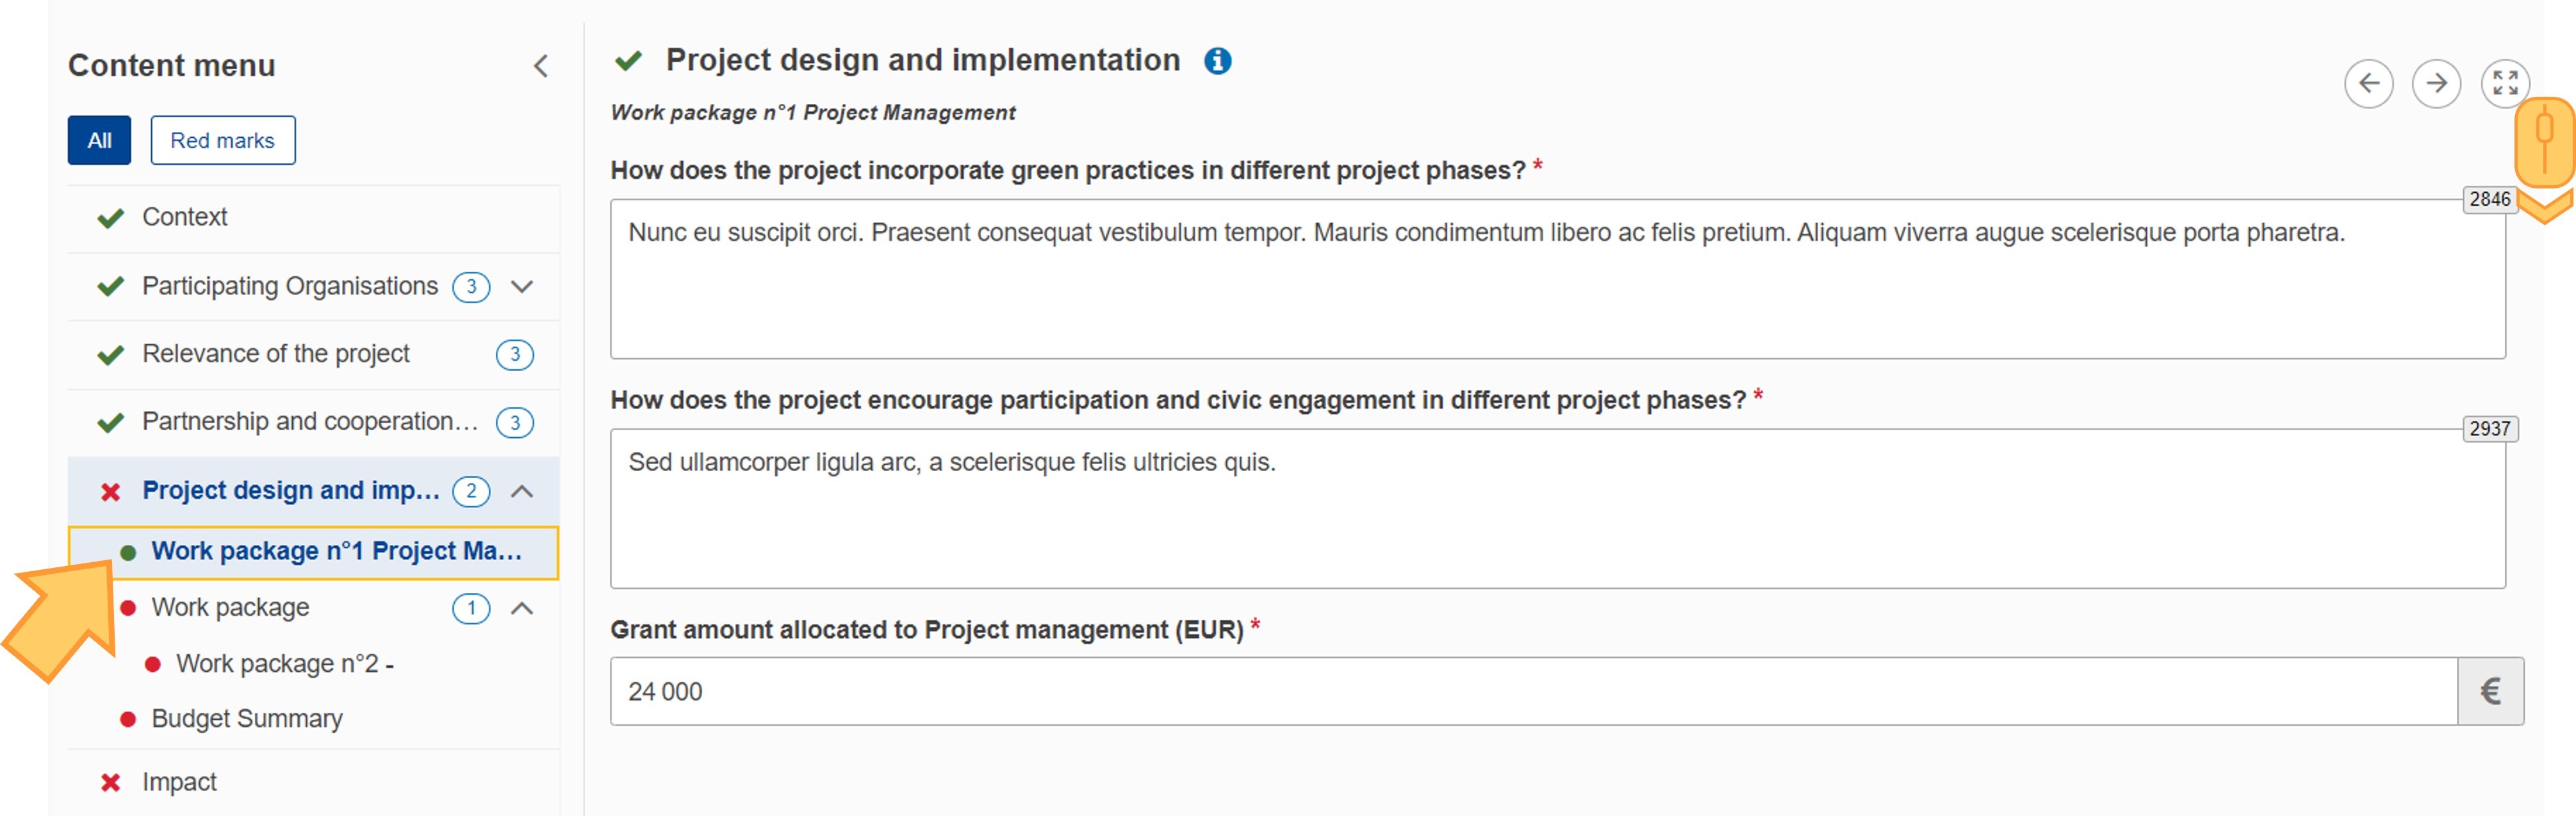 Project Management section complete